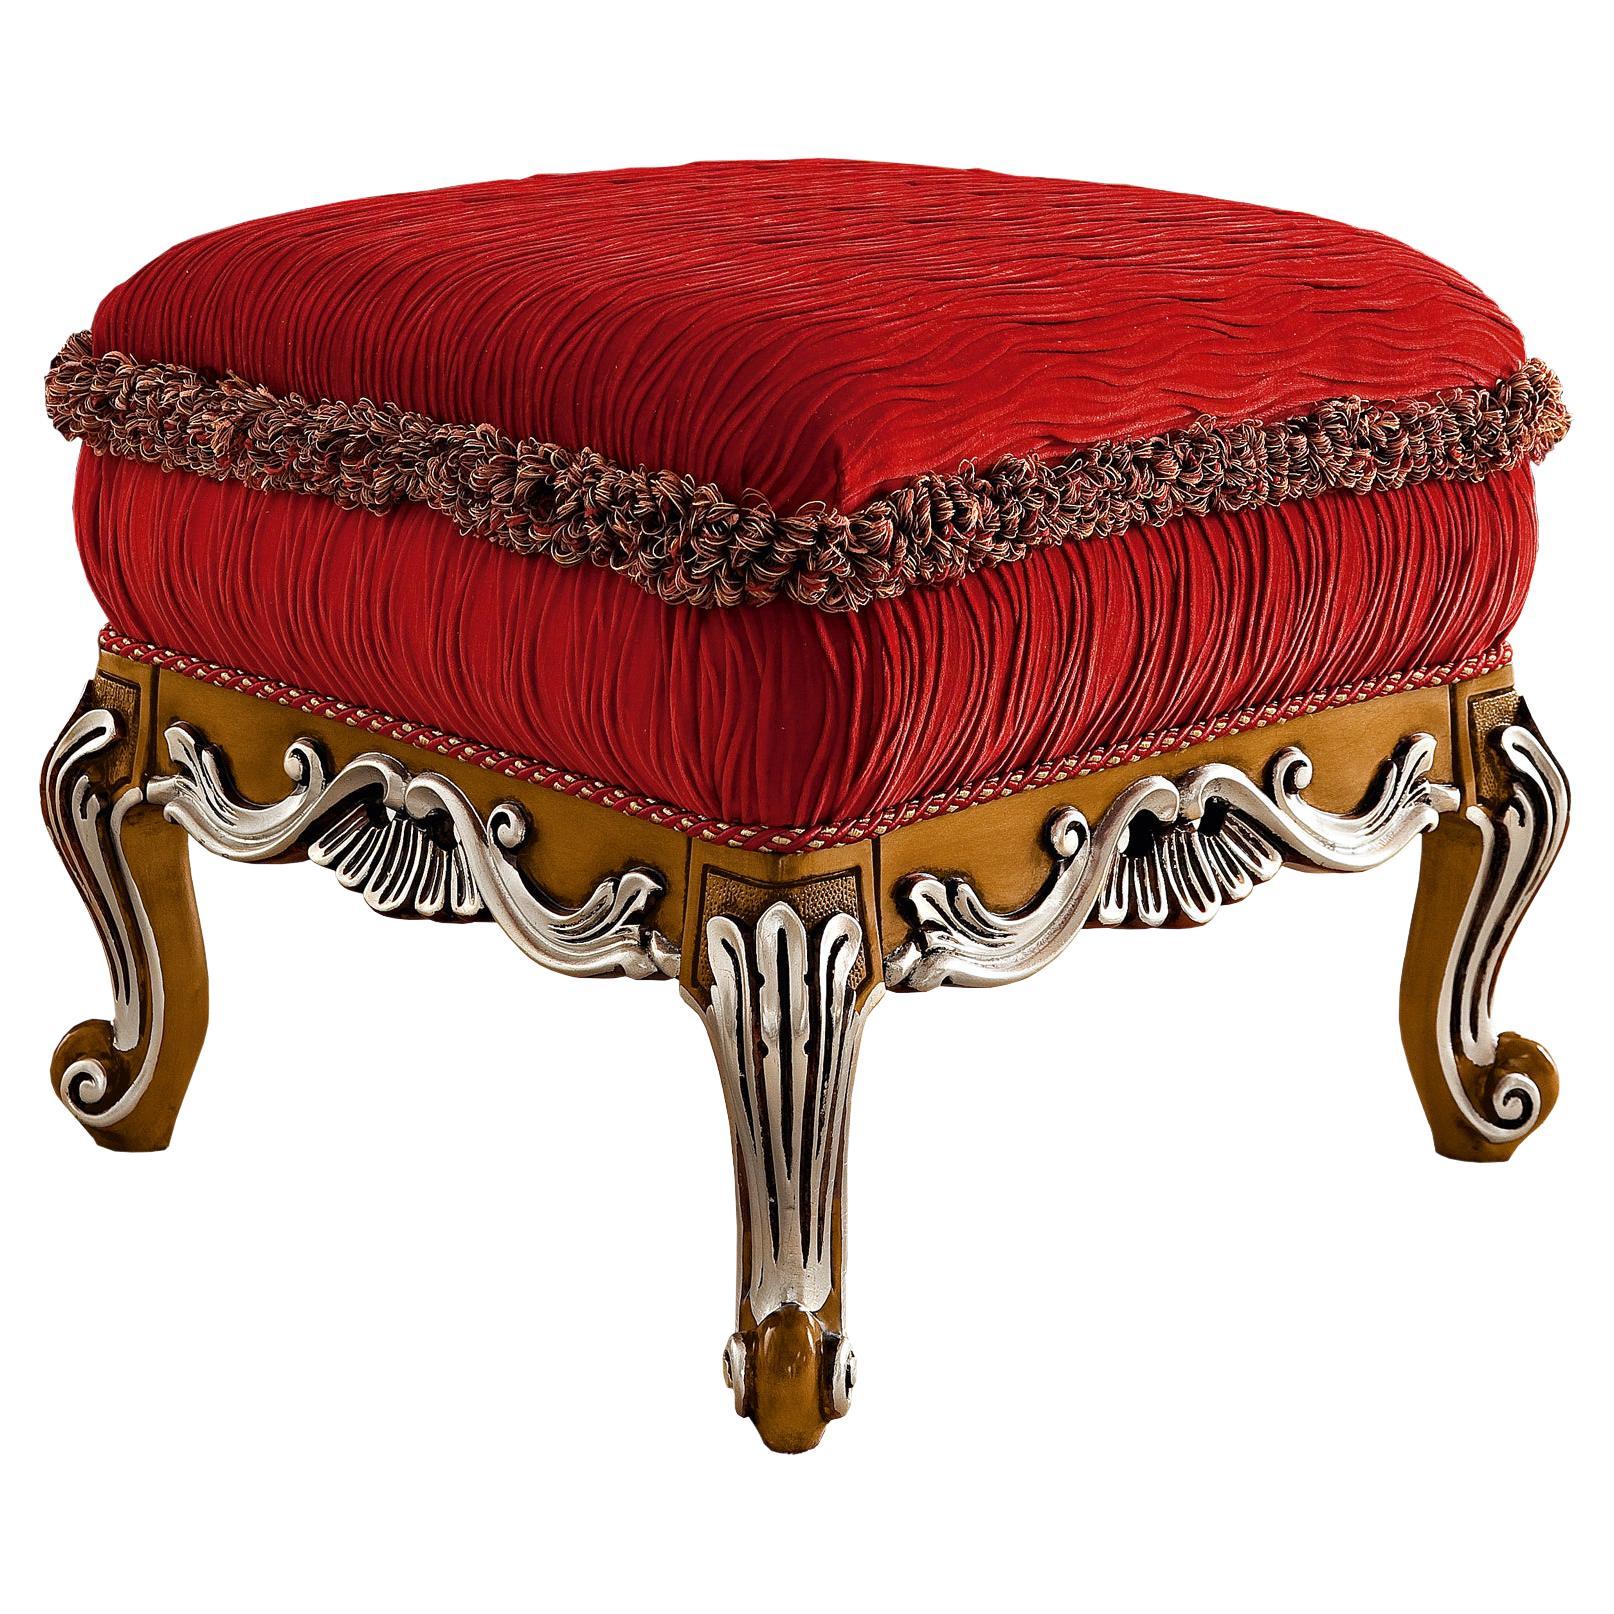 21st Century Red Baroque-Inspired Ottoman by Modenese Gastone For Sale